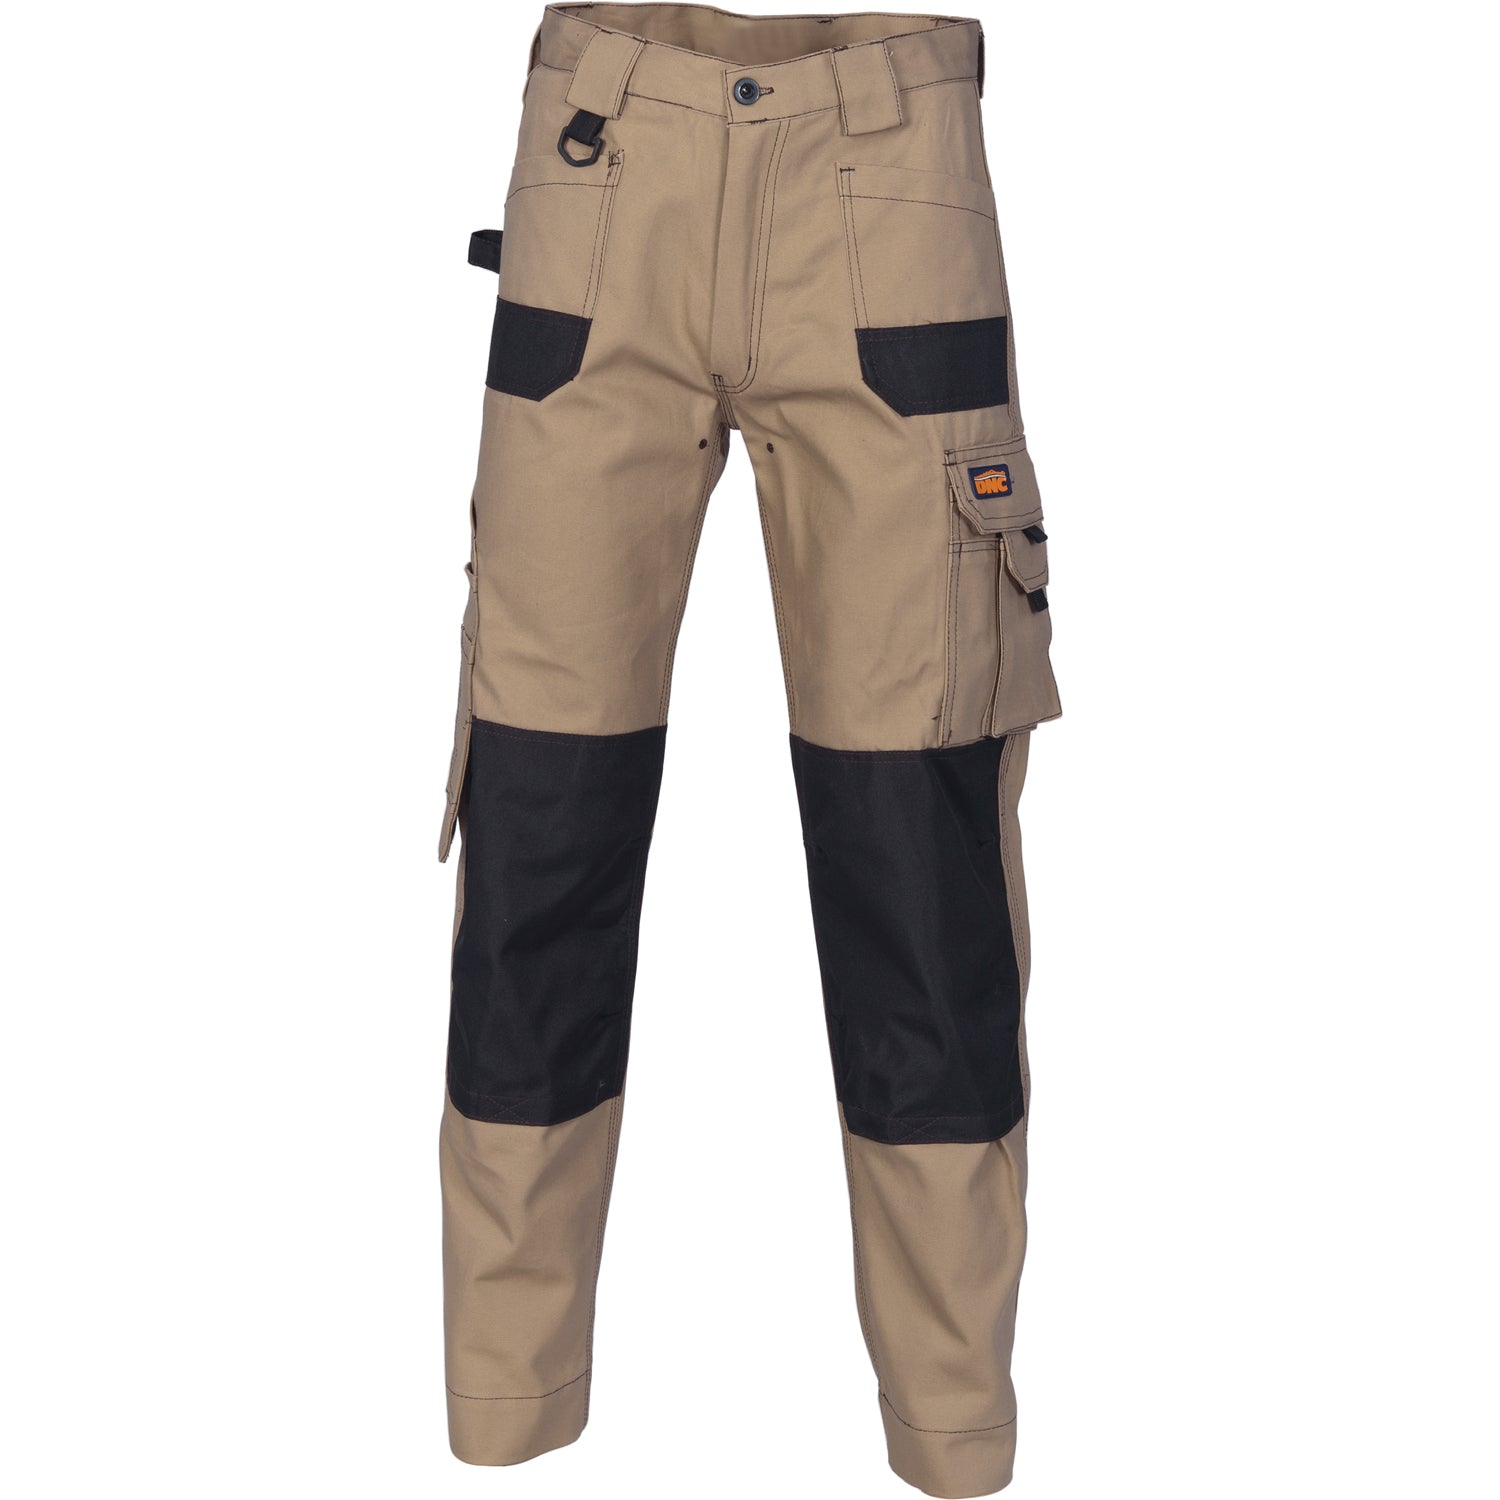 DNC Duratex Cotton Duck Weave Cargo Pants - knee pads not included -(3335)